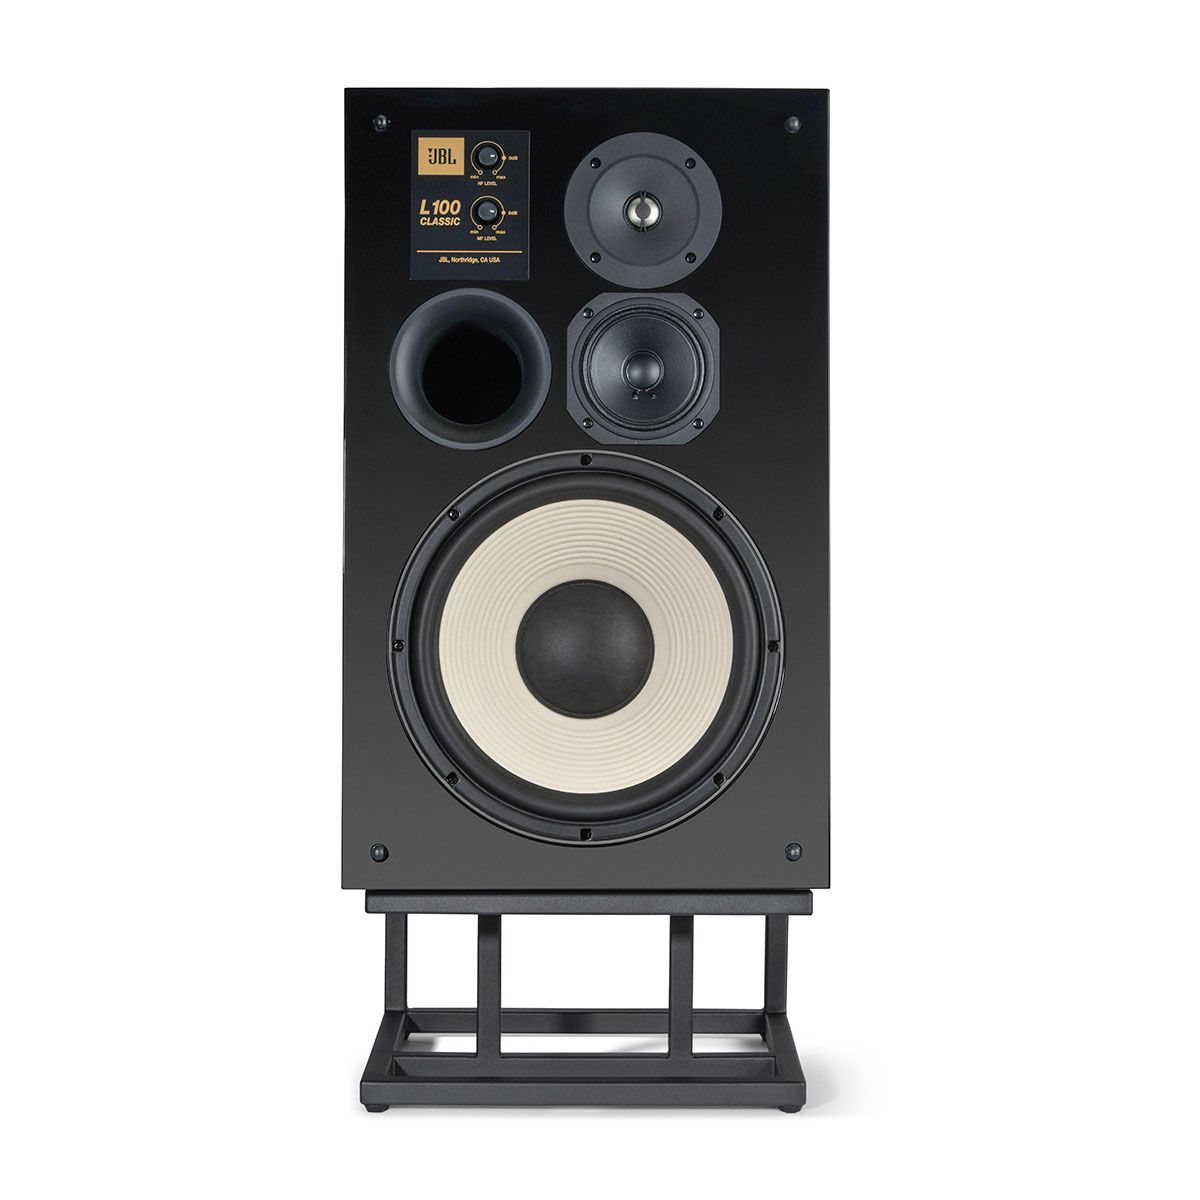 JBL L100 Classic Bookshelf Speaker - Limited Edition Gloss Black front view of single speaker on JS120 stand without grille